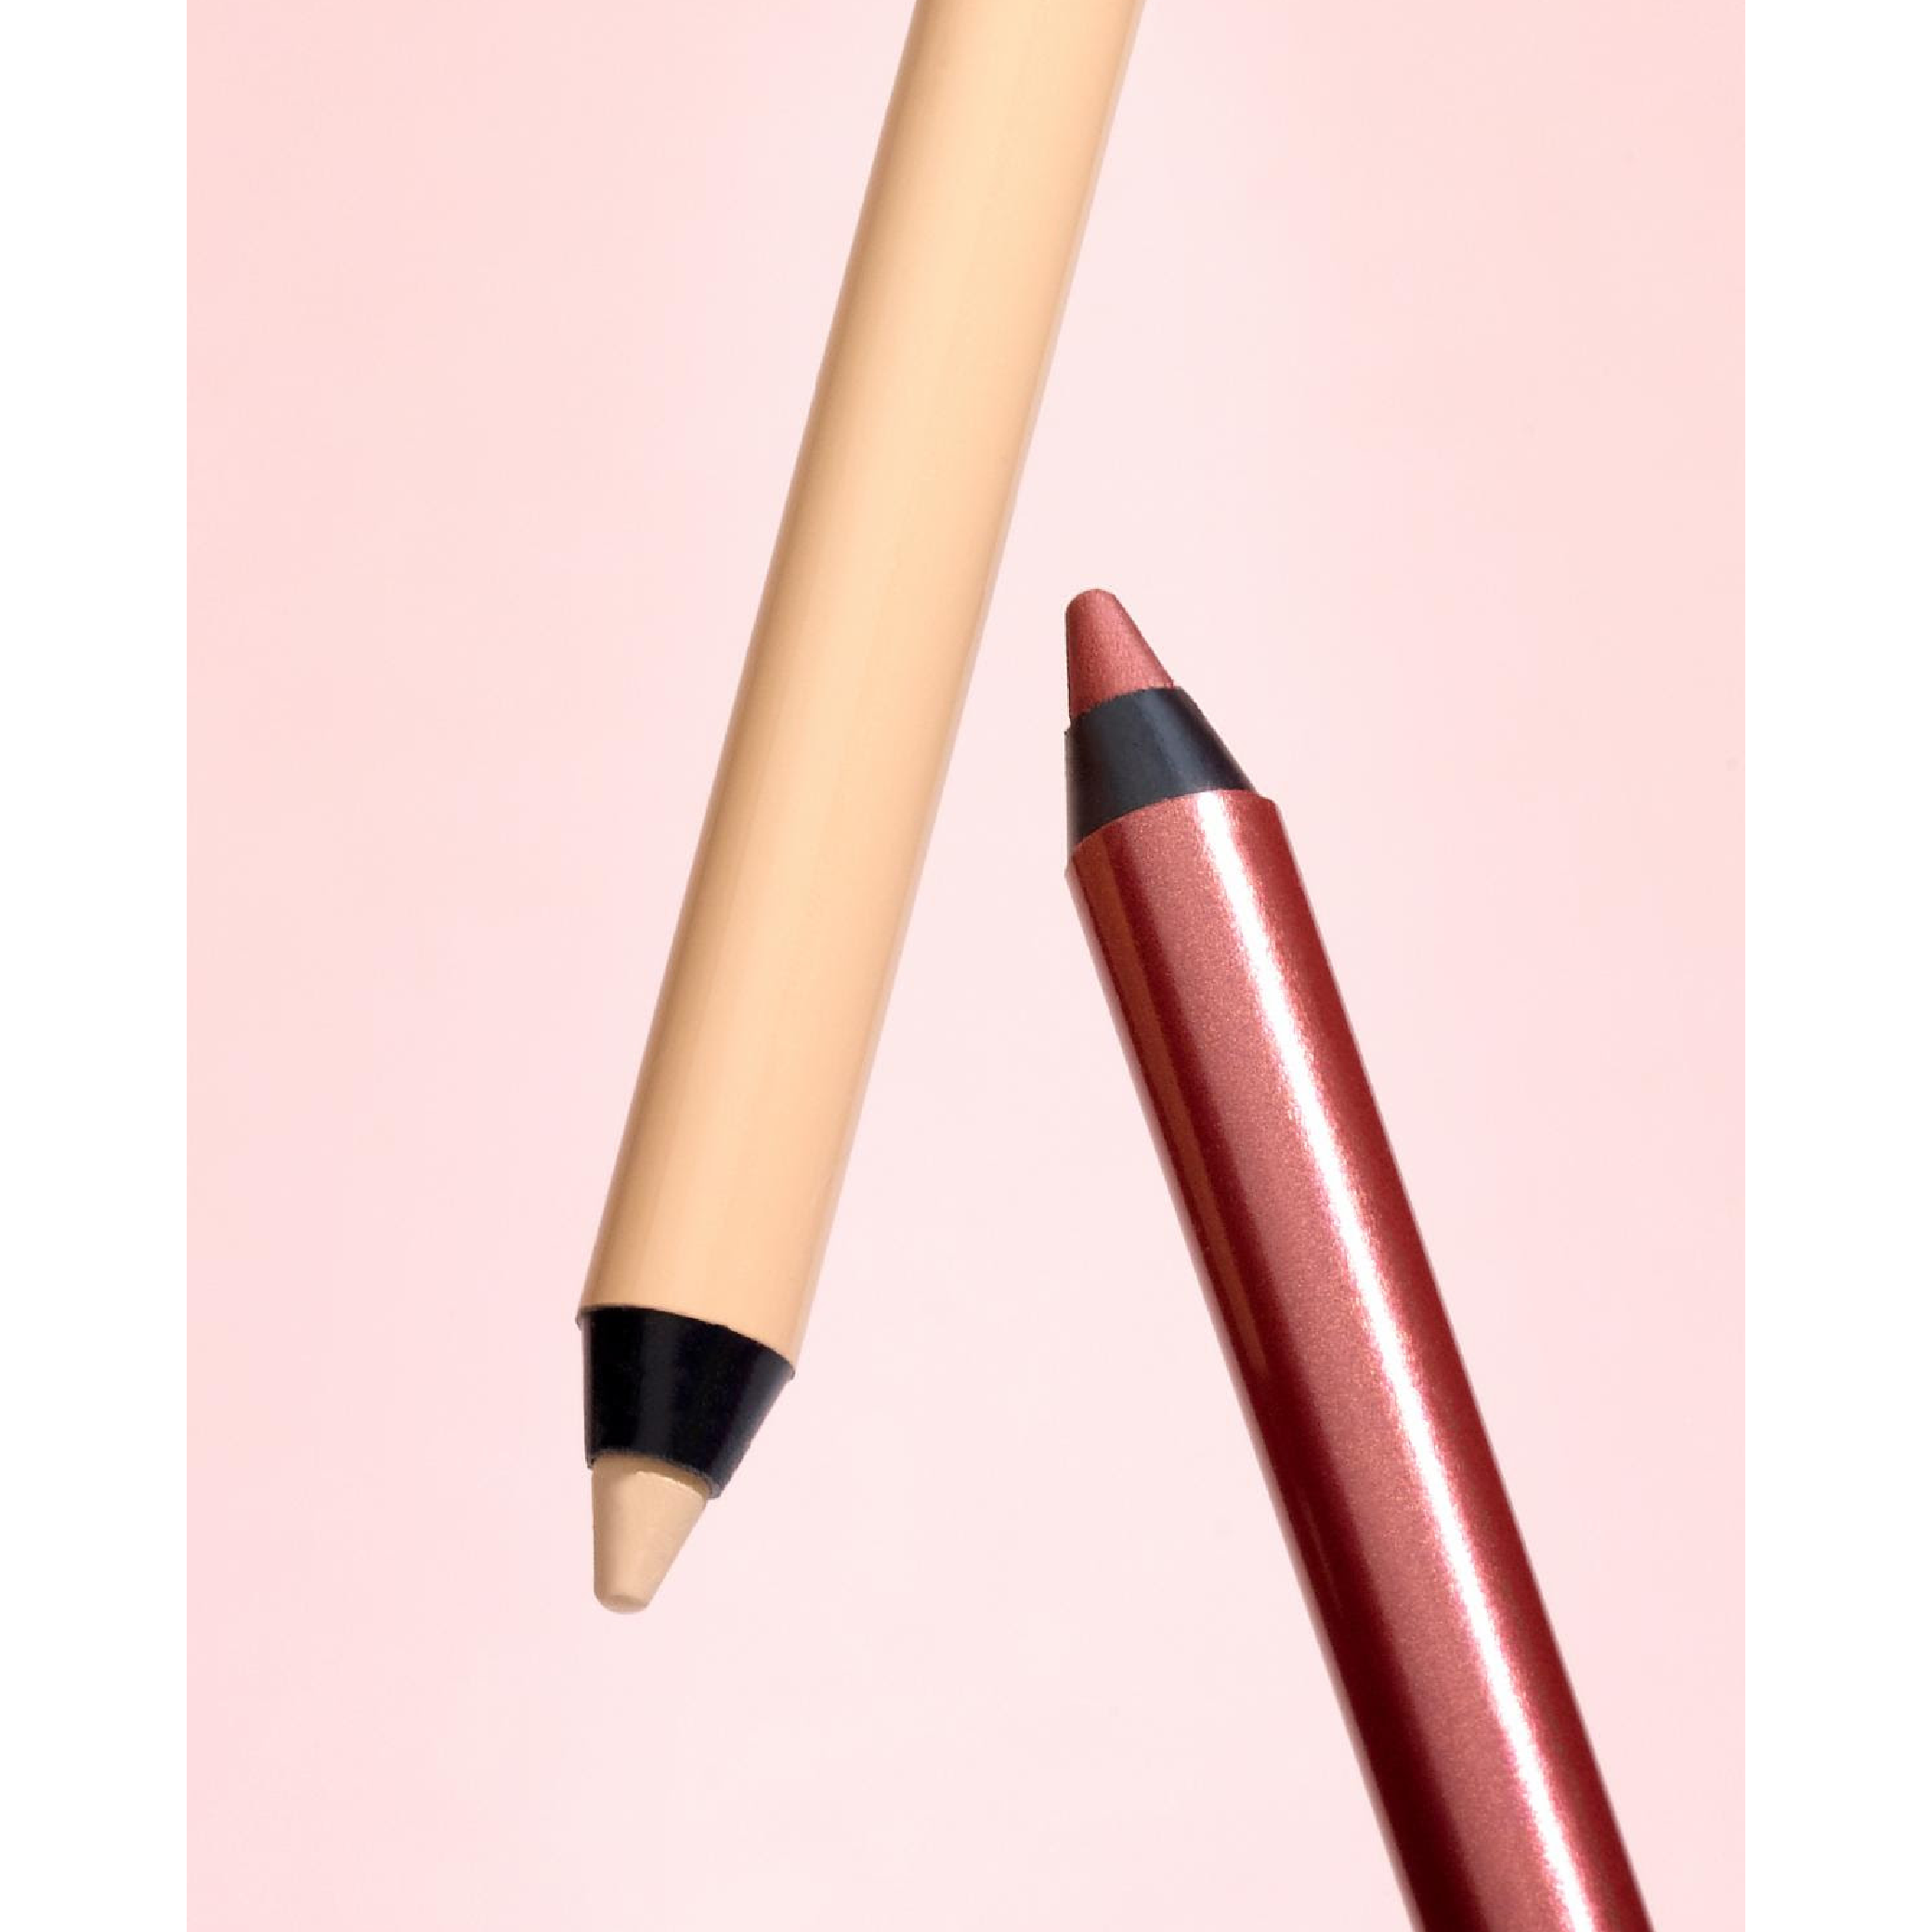 RVB Lab the Makeup White Hot Butter and Looking Hot Kajal Eye Pencils, Pink Avenue Skin Care, Toronto, Canada